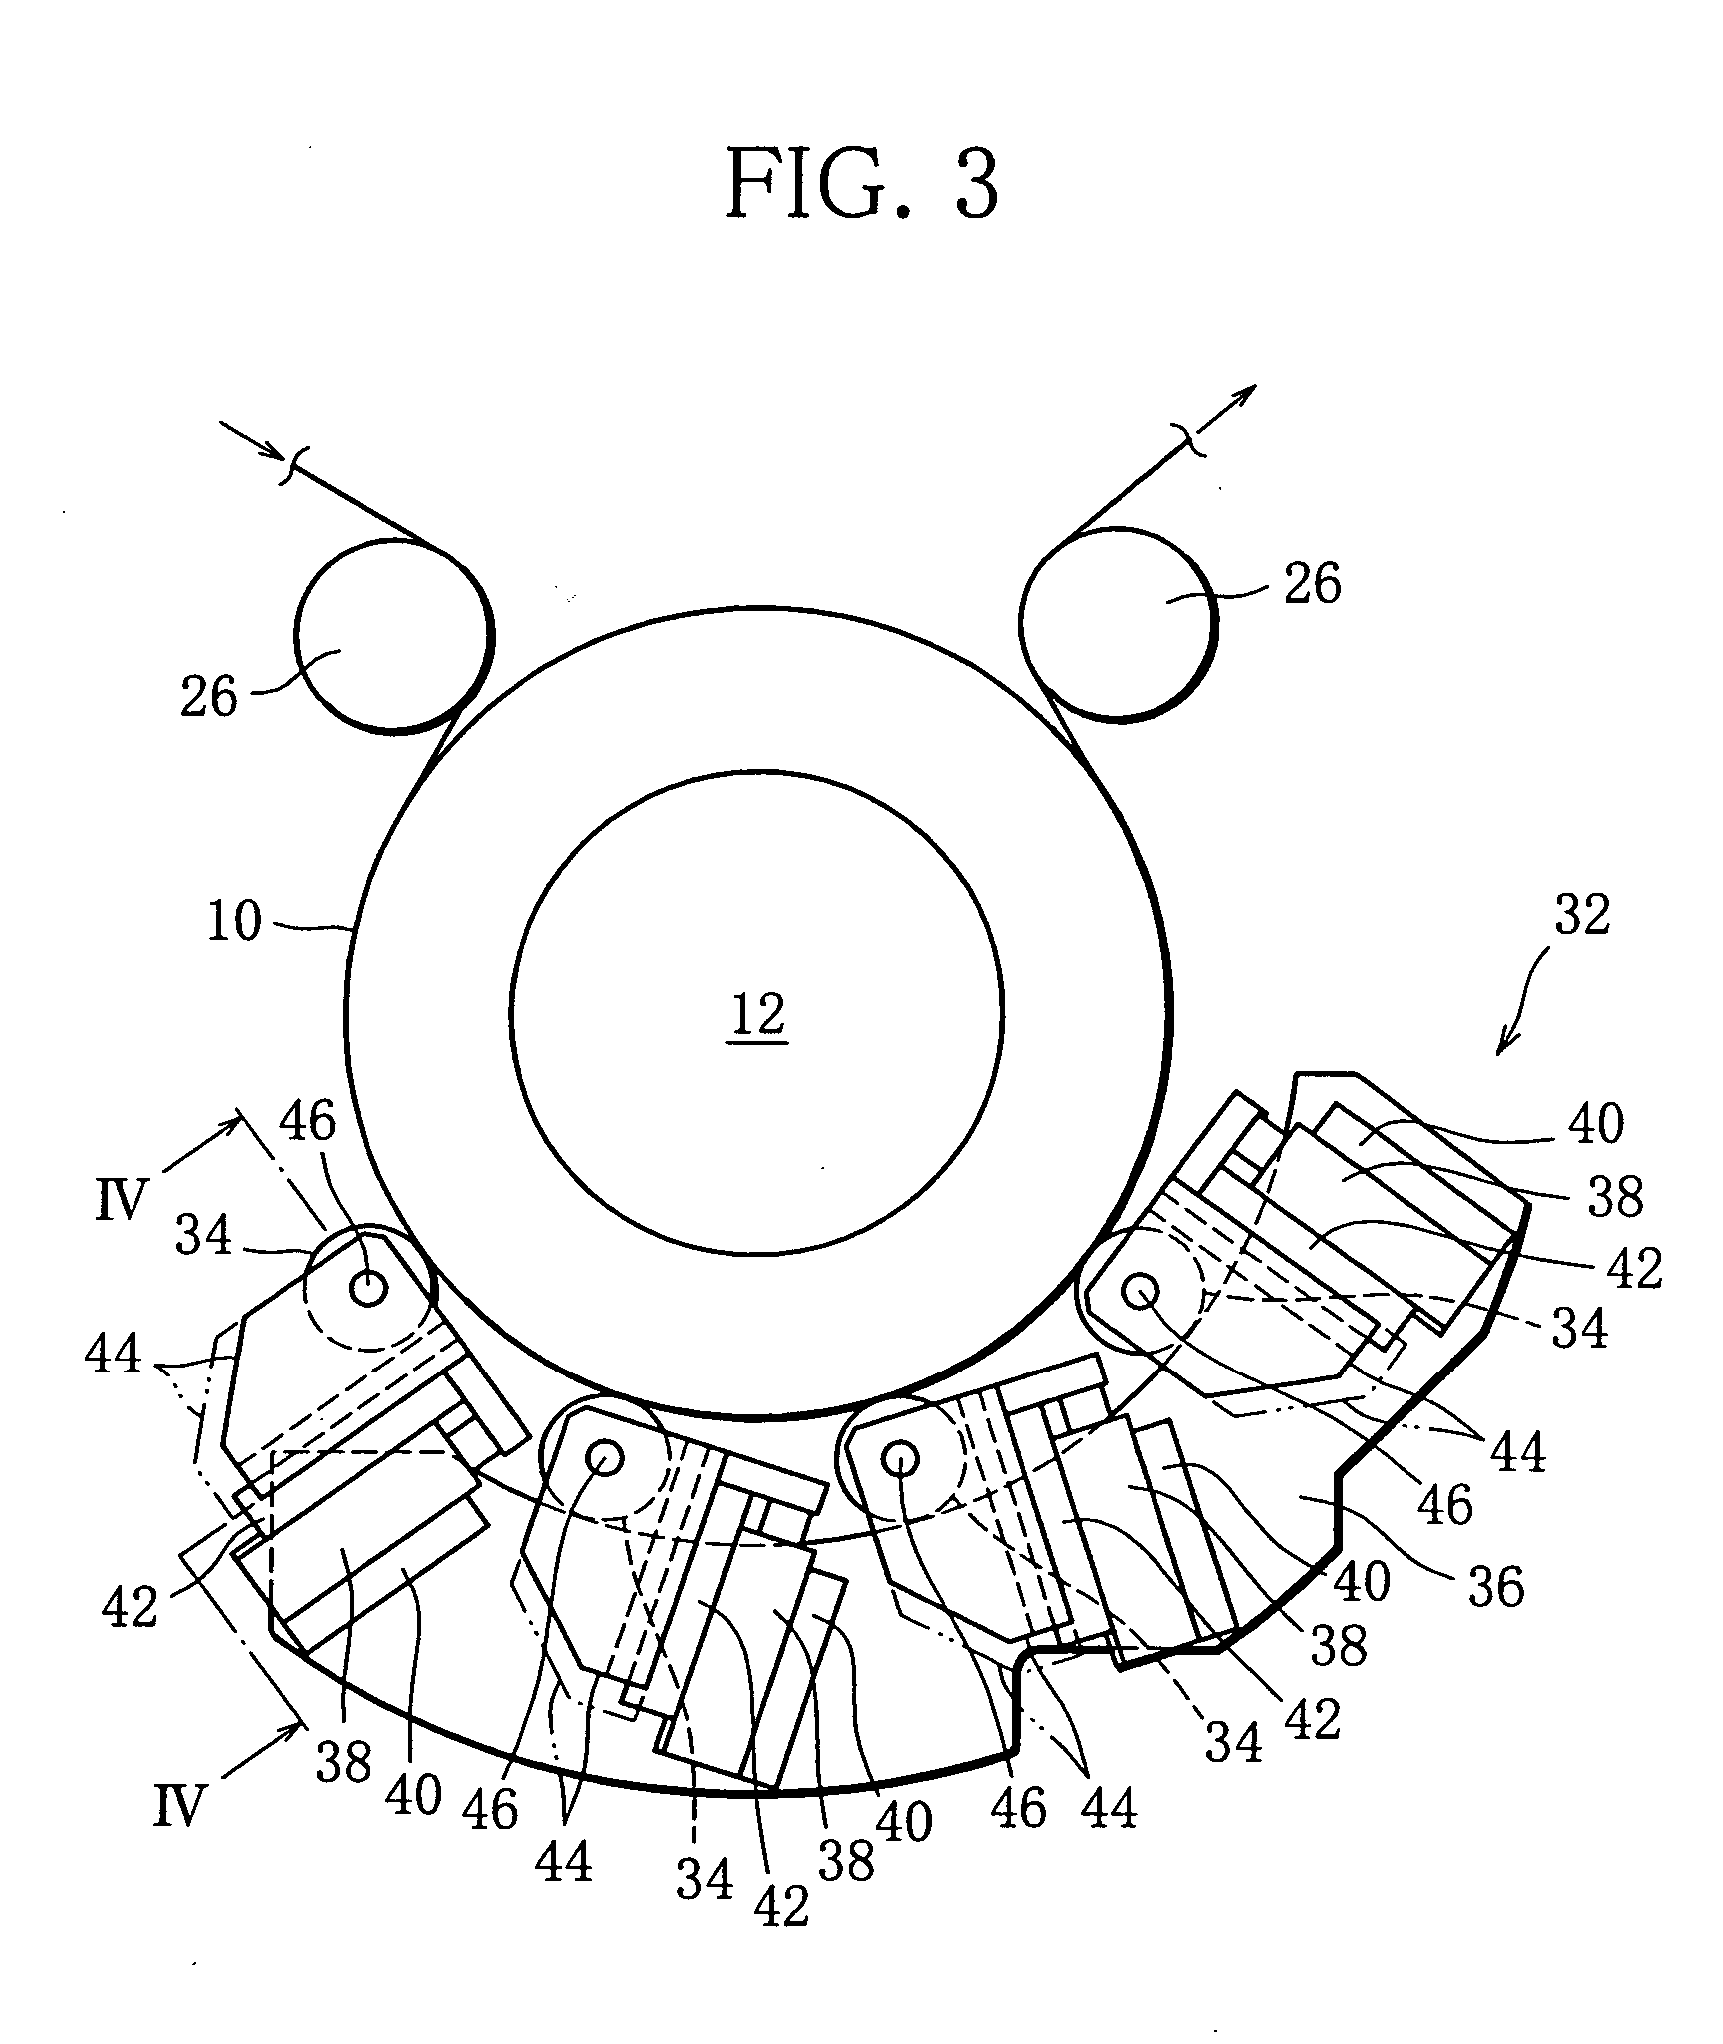 Rod-like article forming apparatus